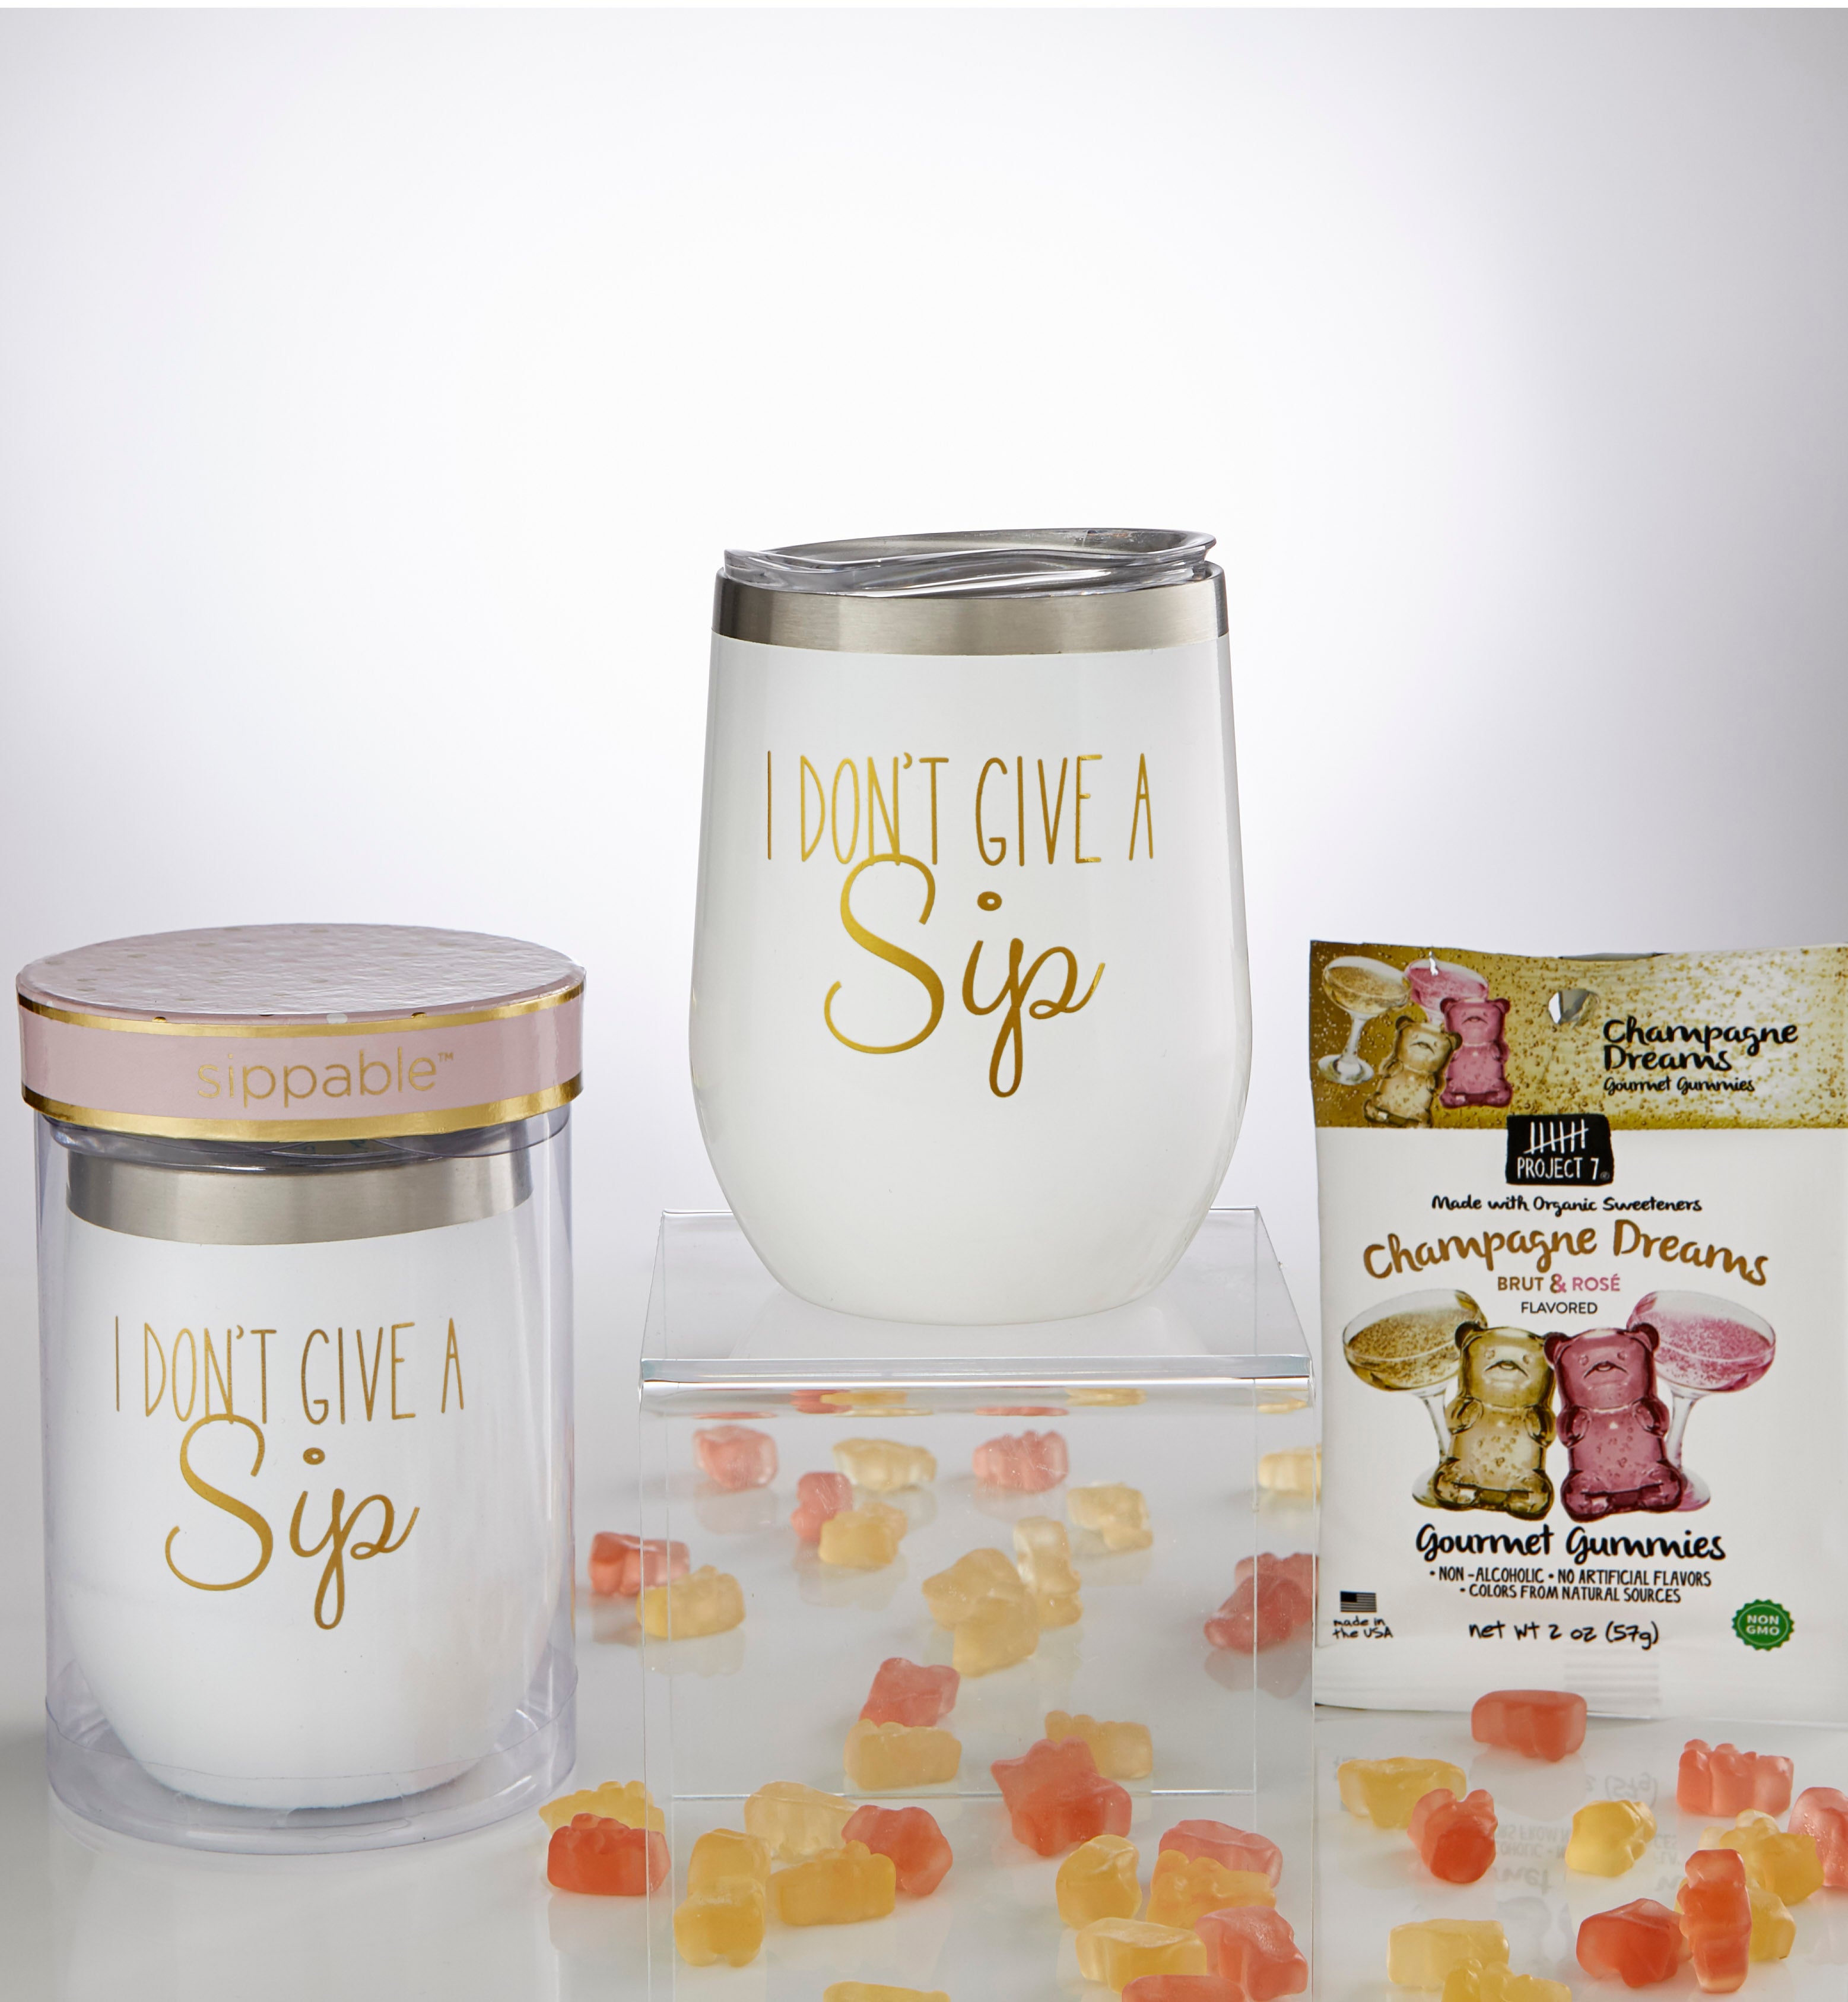 Sippable™ I Don't Give a Sip Tumbler Cup with Gummies